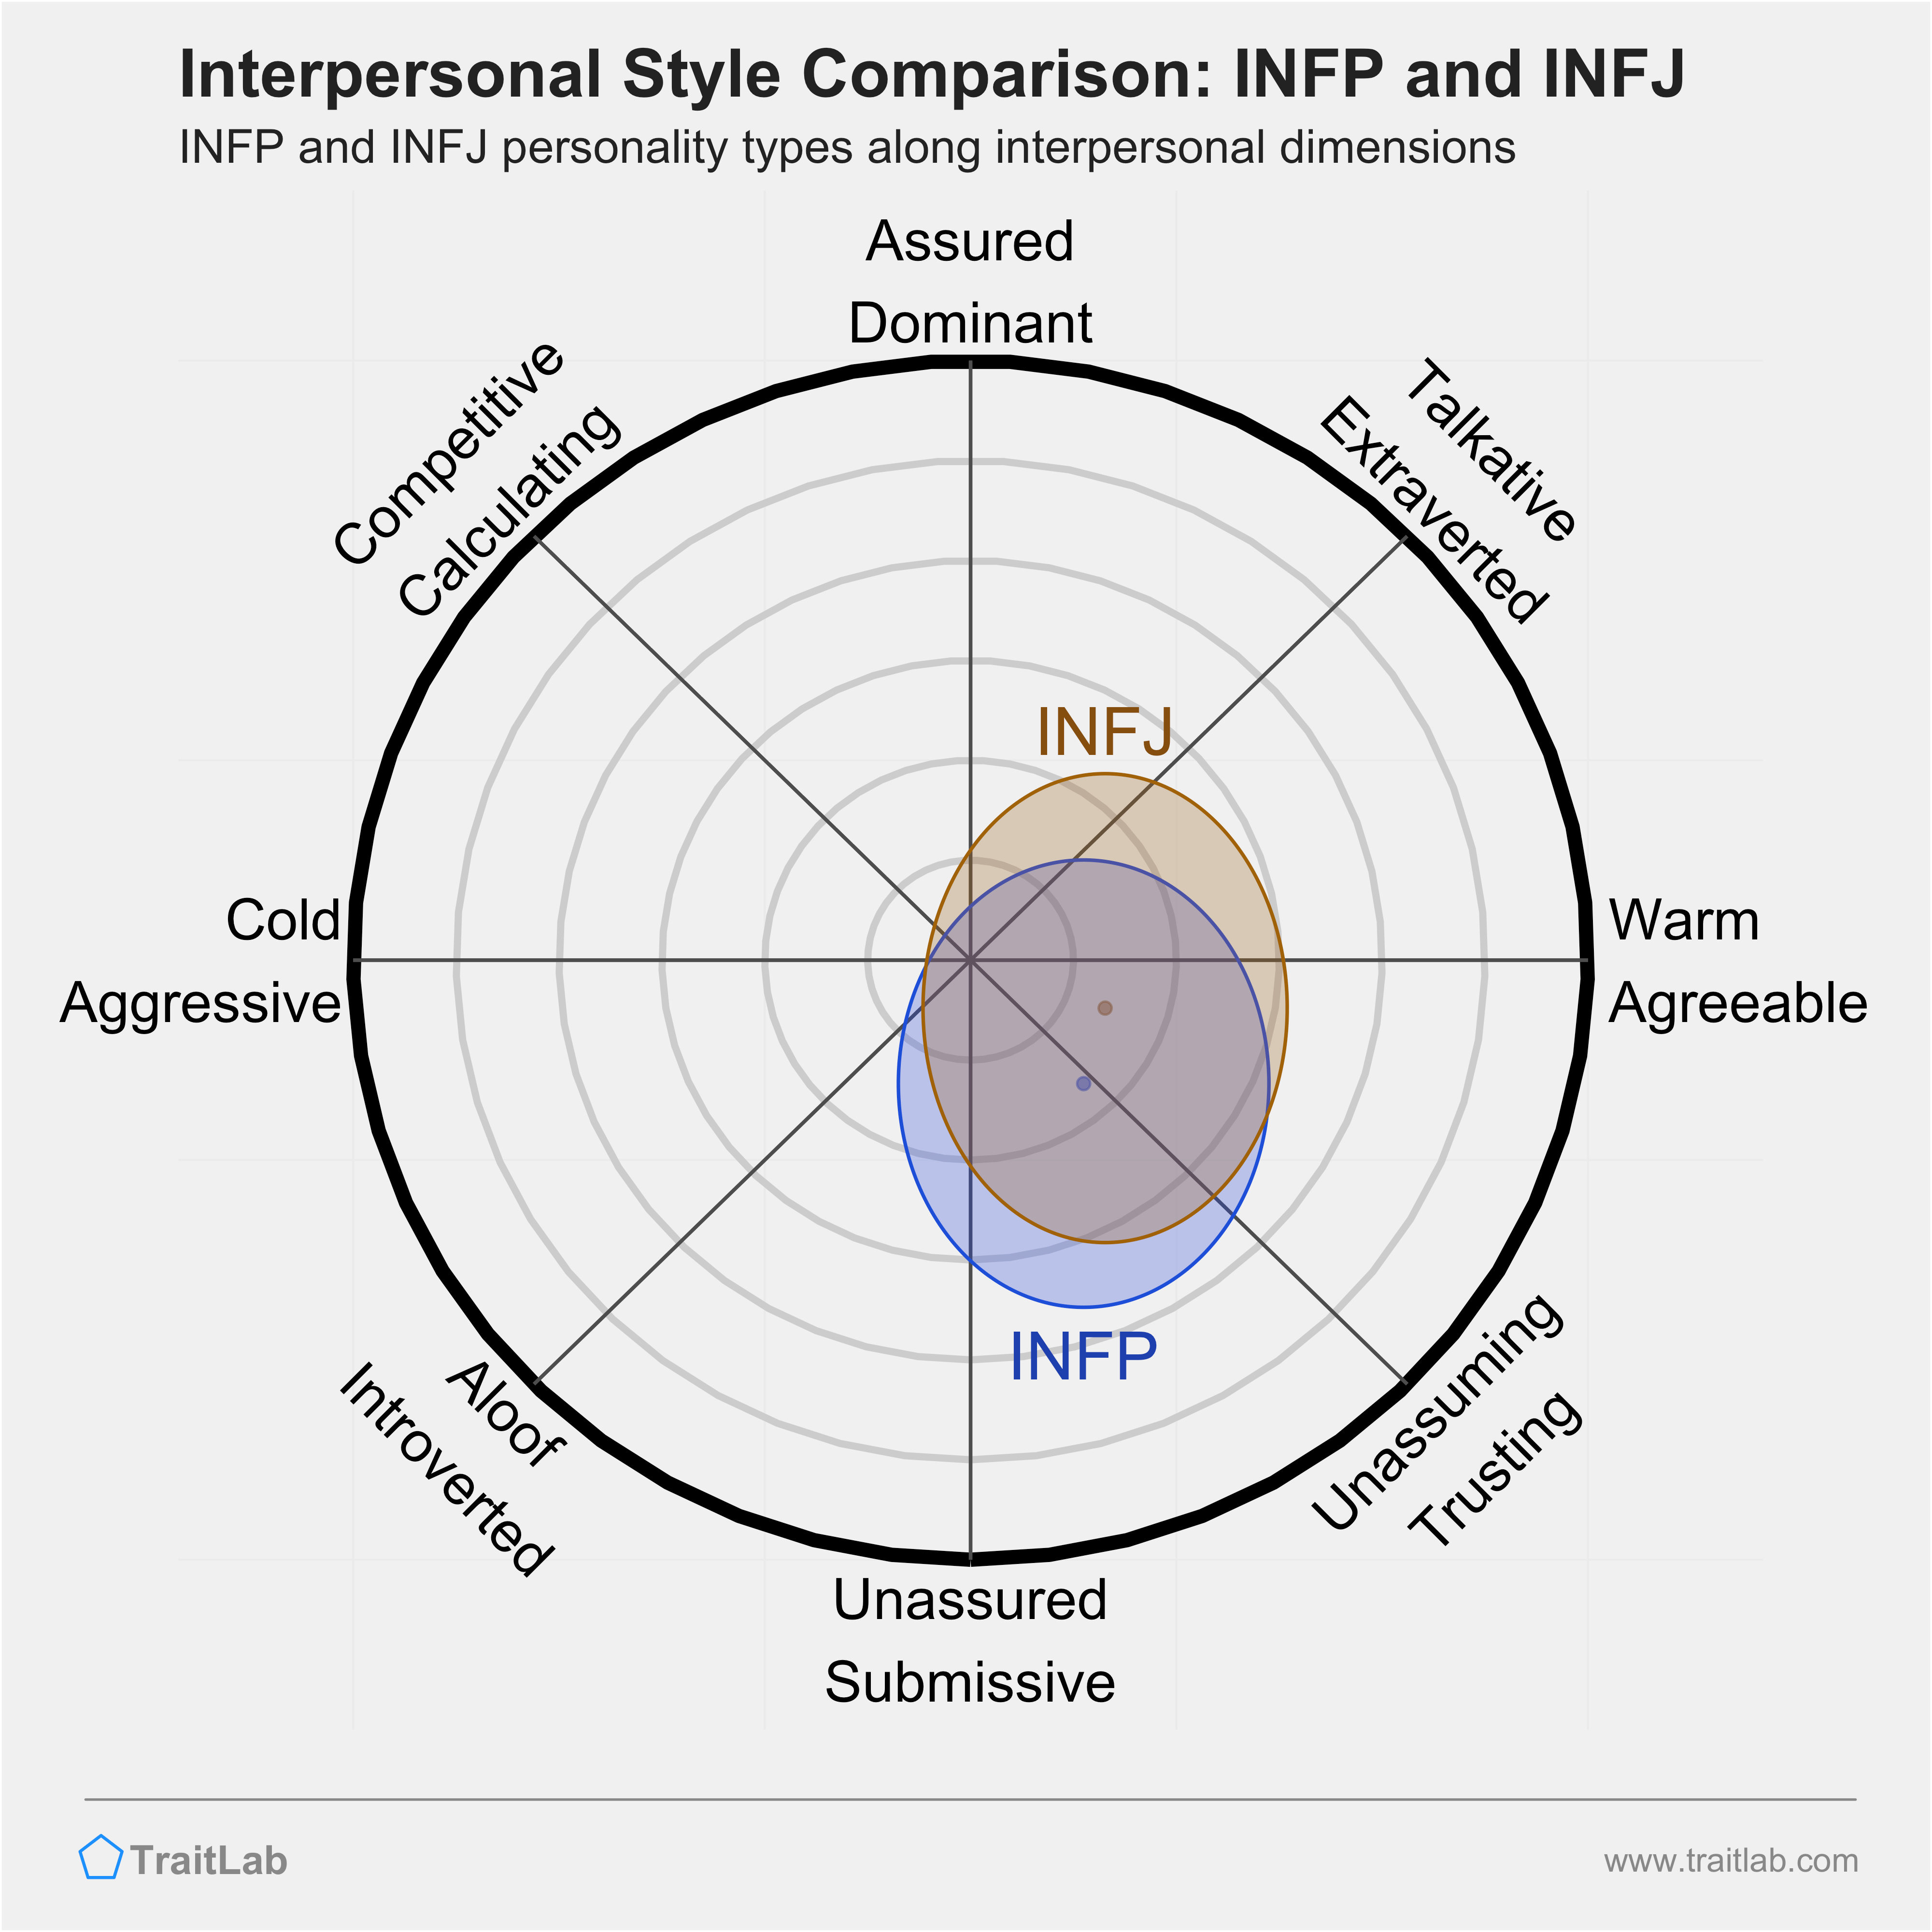 INFP and INFJ comparison across interpersonal dimensions